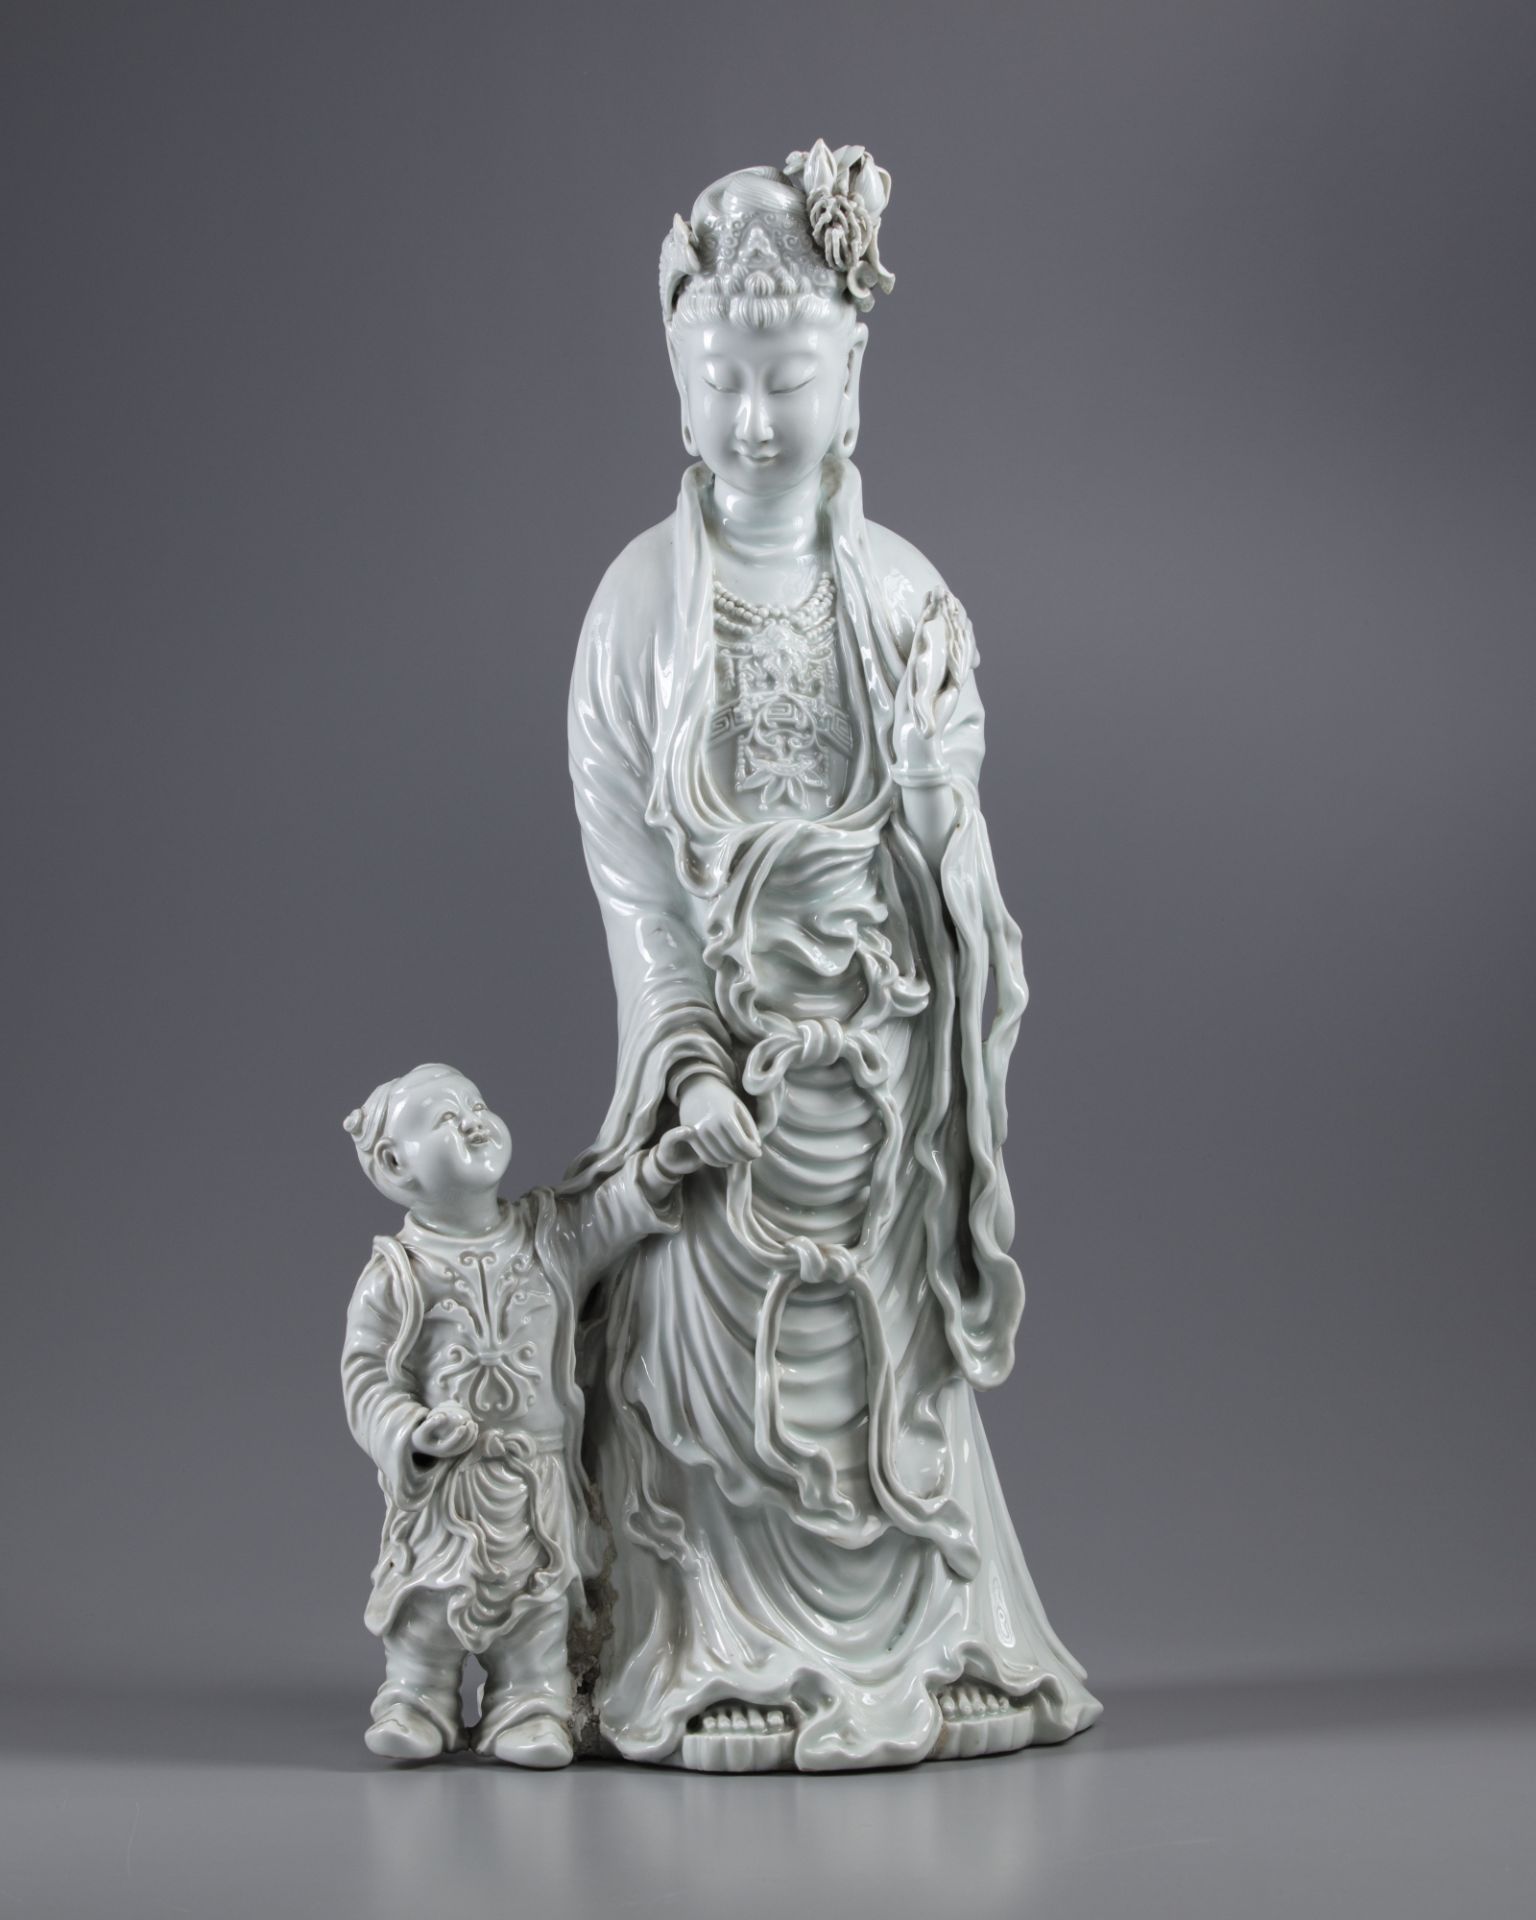 An exceptional large dehua glazed figure of Guanyin with child